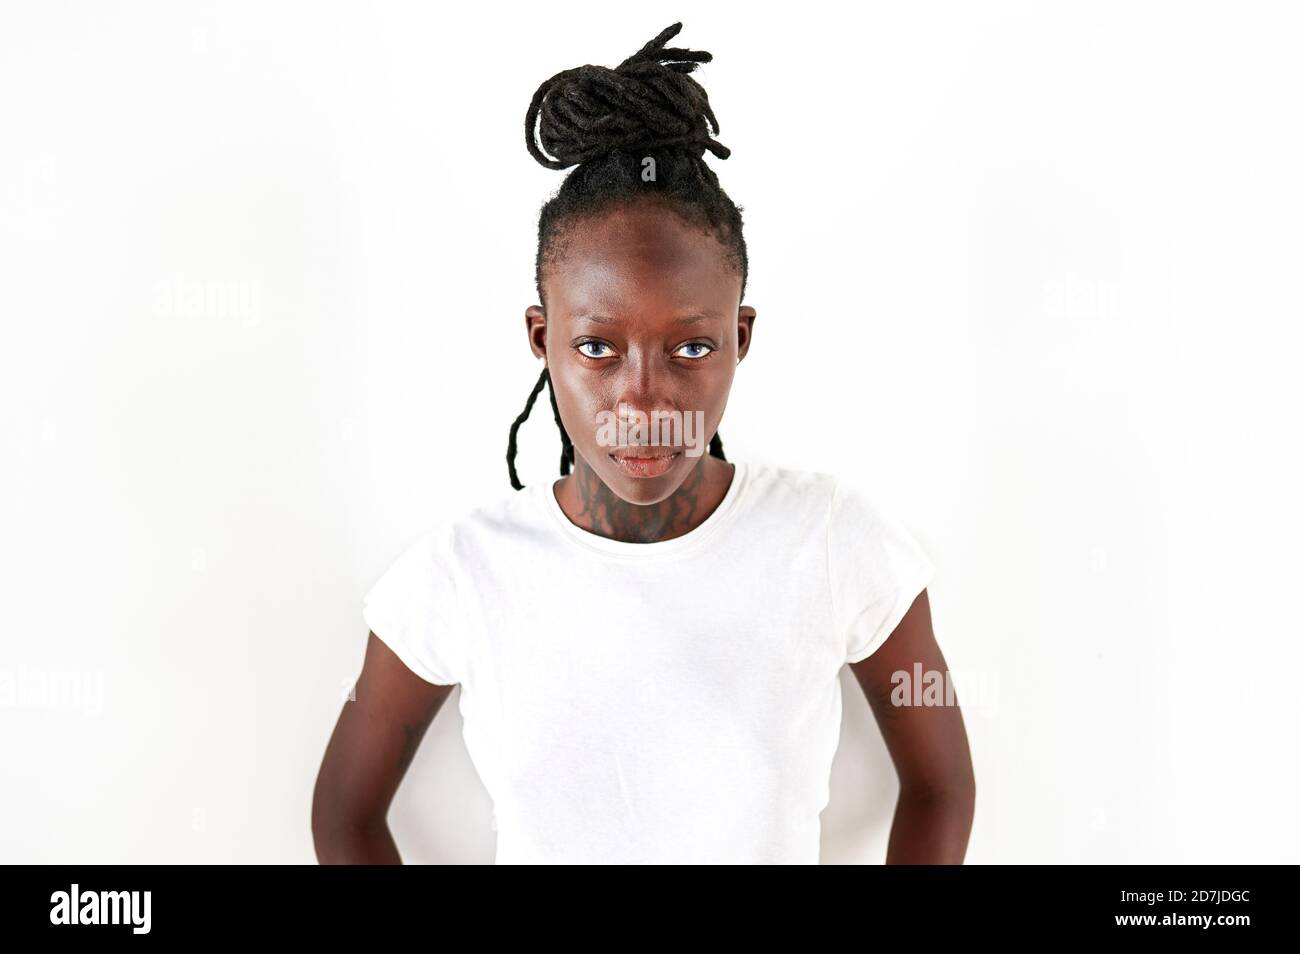 Serious young woman with locs standing against white background Stock Photo